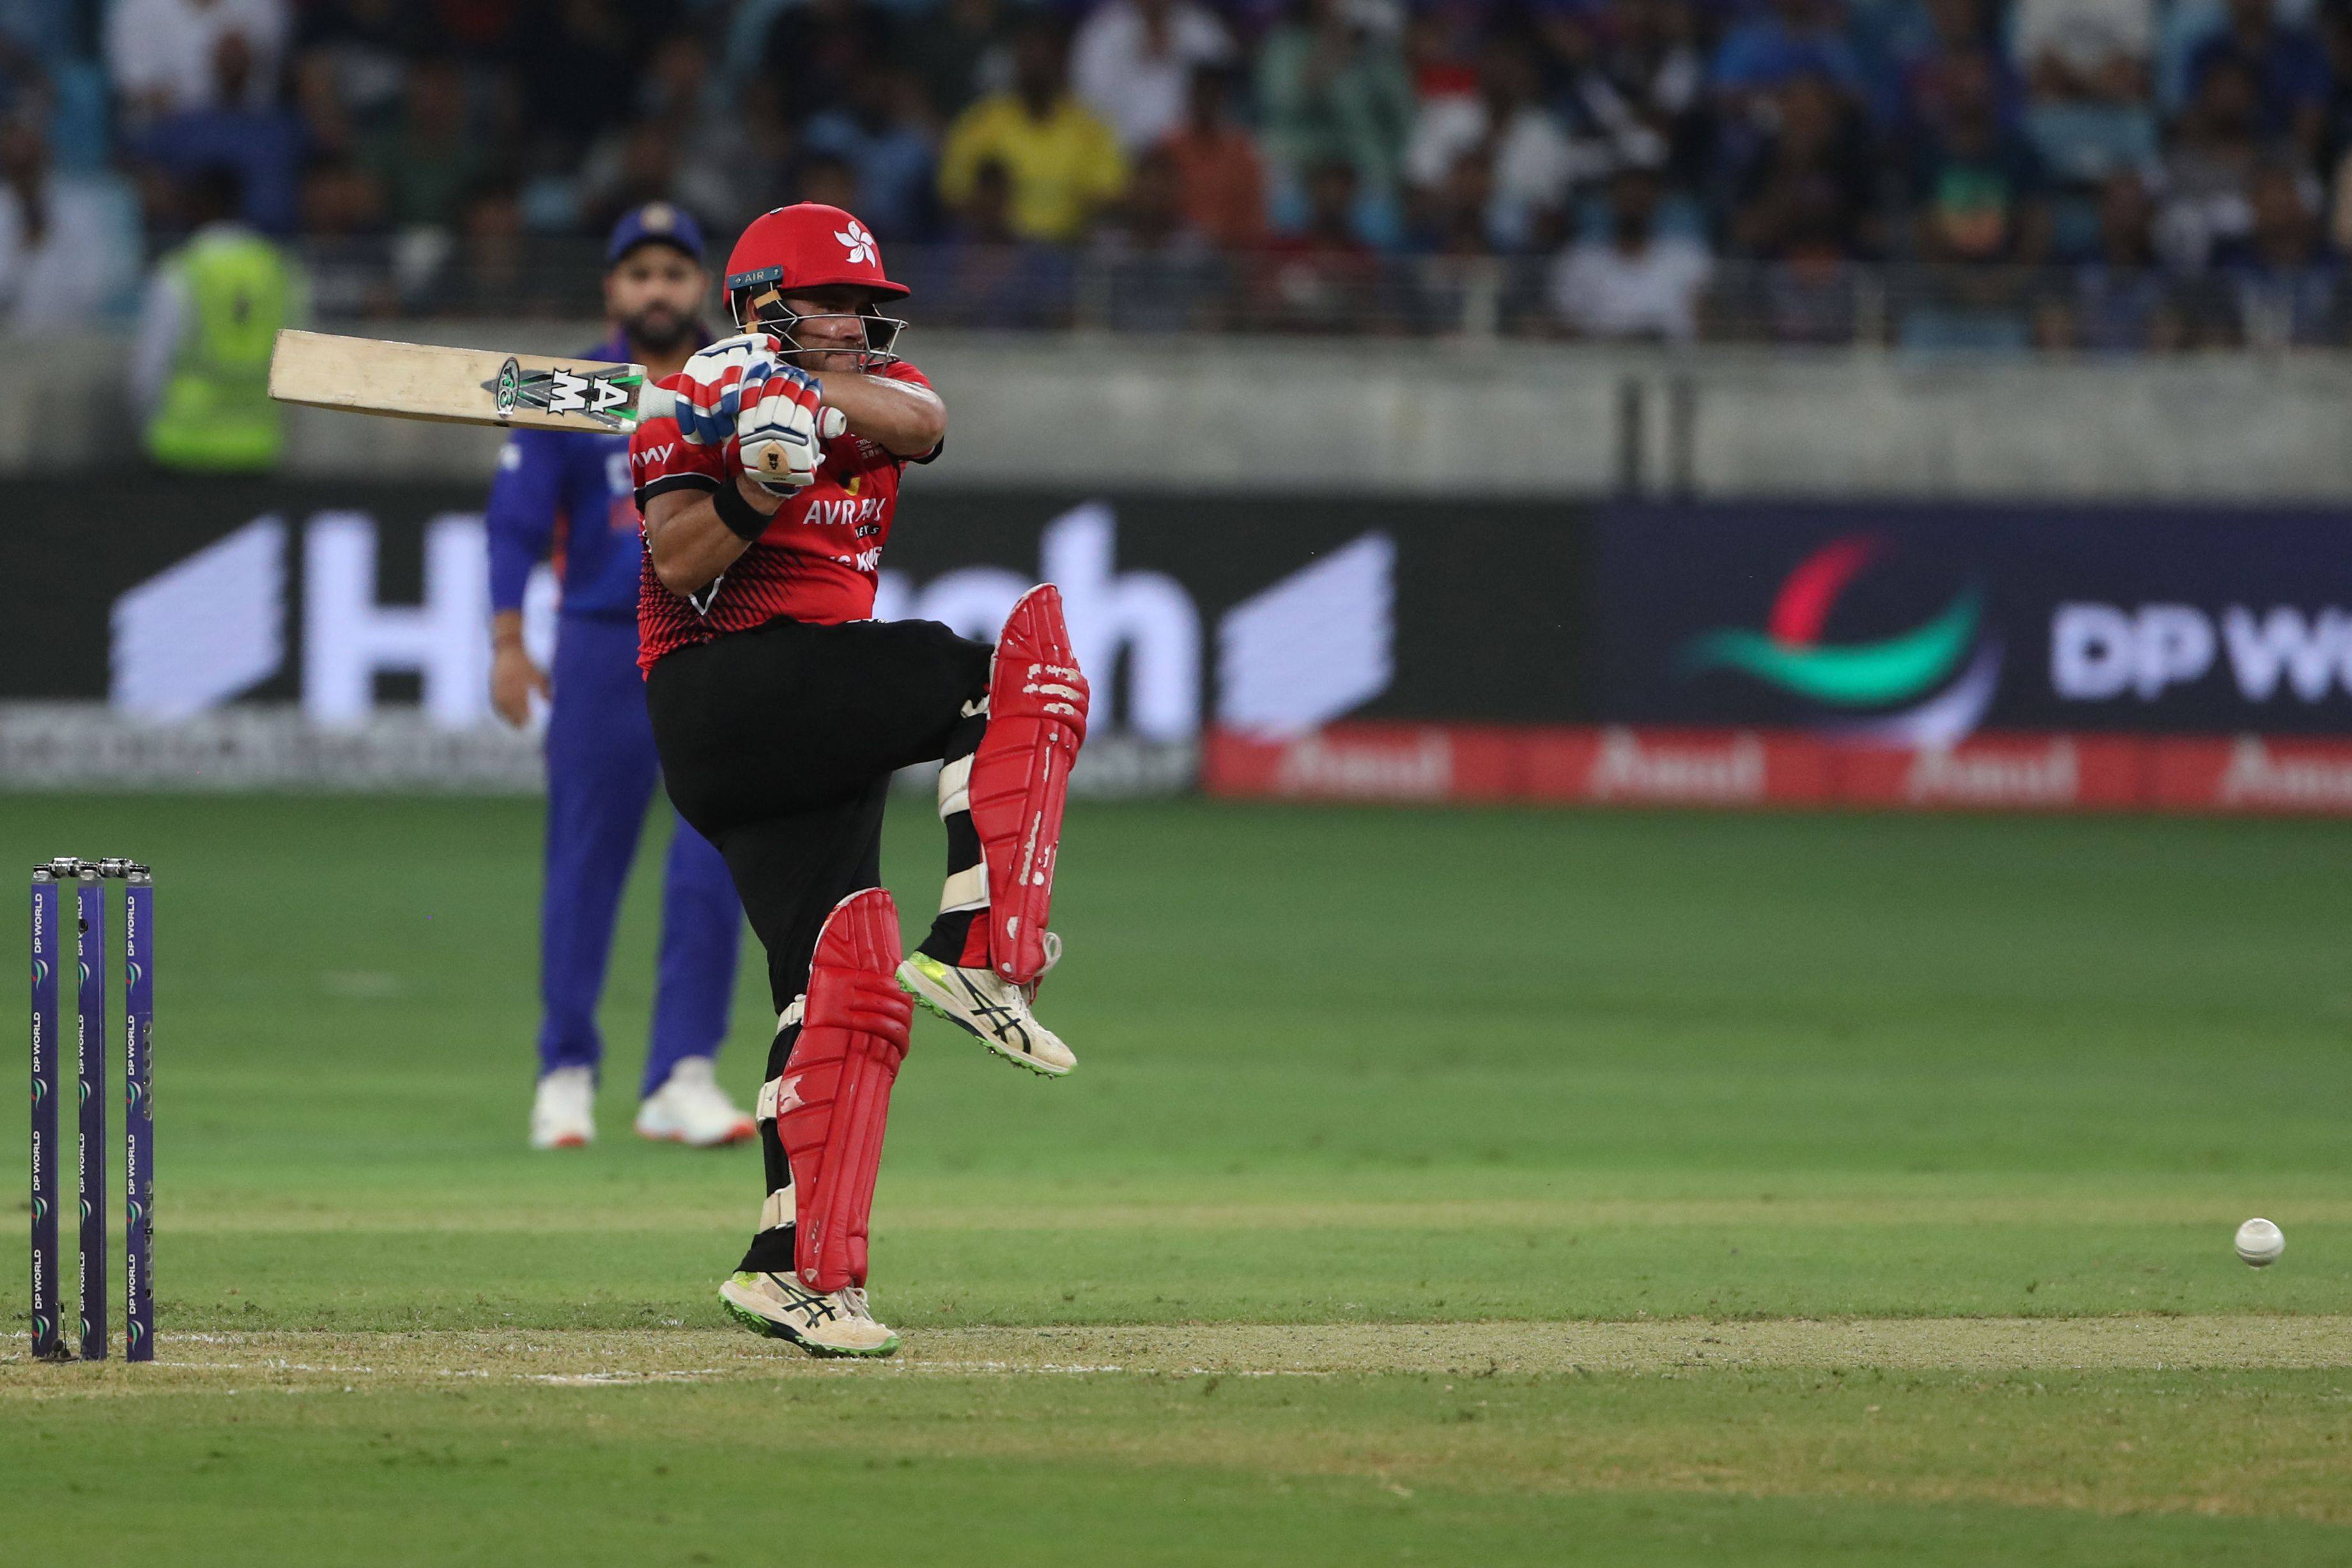 Hong Kong’s Yasim Murtaza plays a shot during the Asia Cup Twenty20 international against India in Dubai on August 31, 2022. Photo: AFP